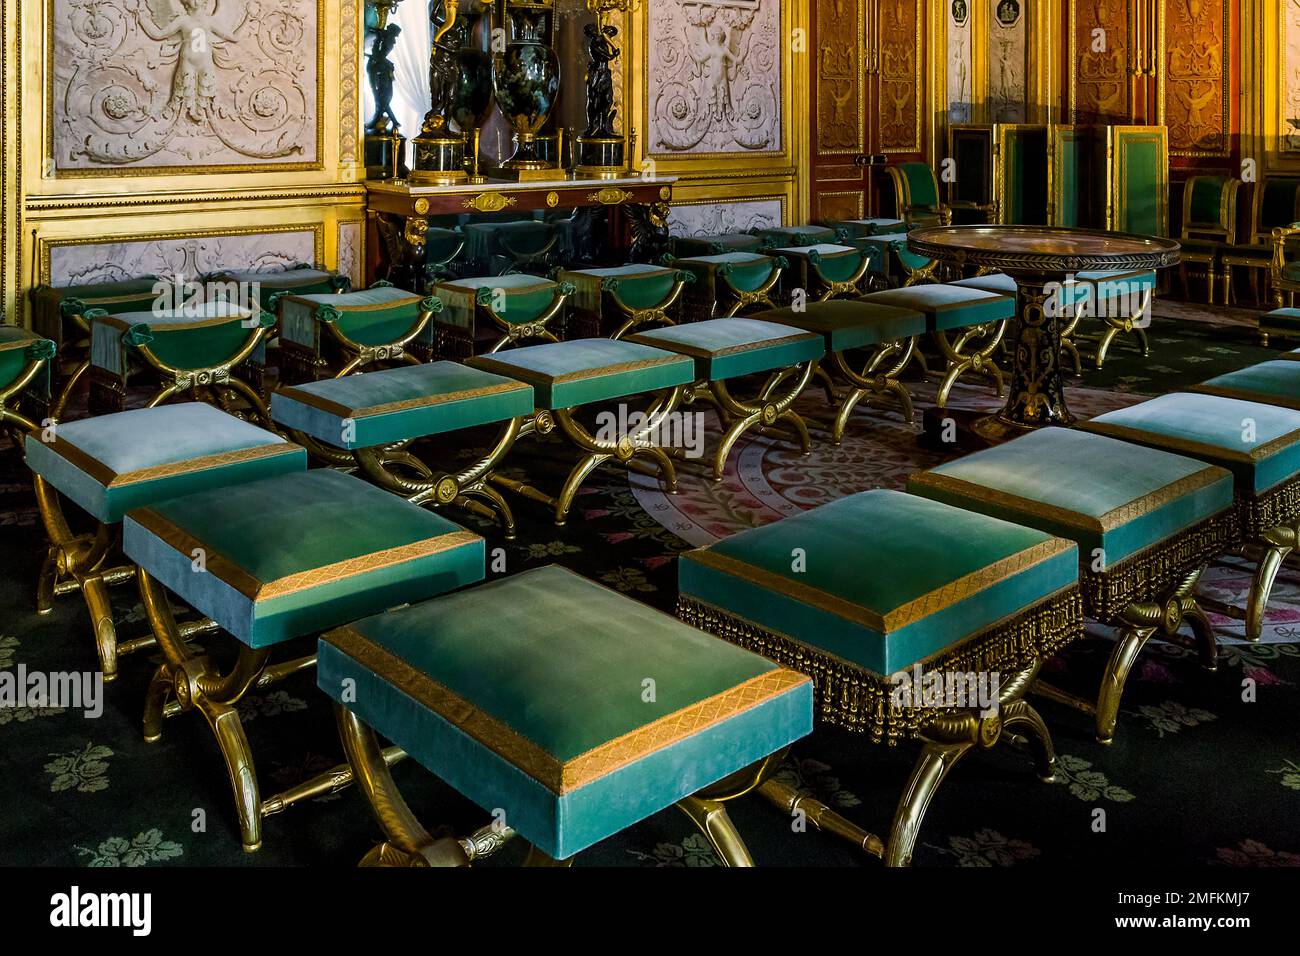 FONTAINBLEAU, FRANCE - MAY 16, 2015: It is part of the premises of the Queen's boudoir. Stock Photo